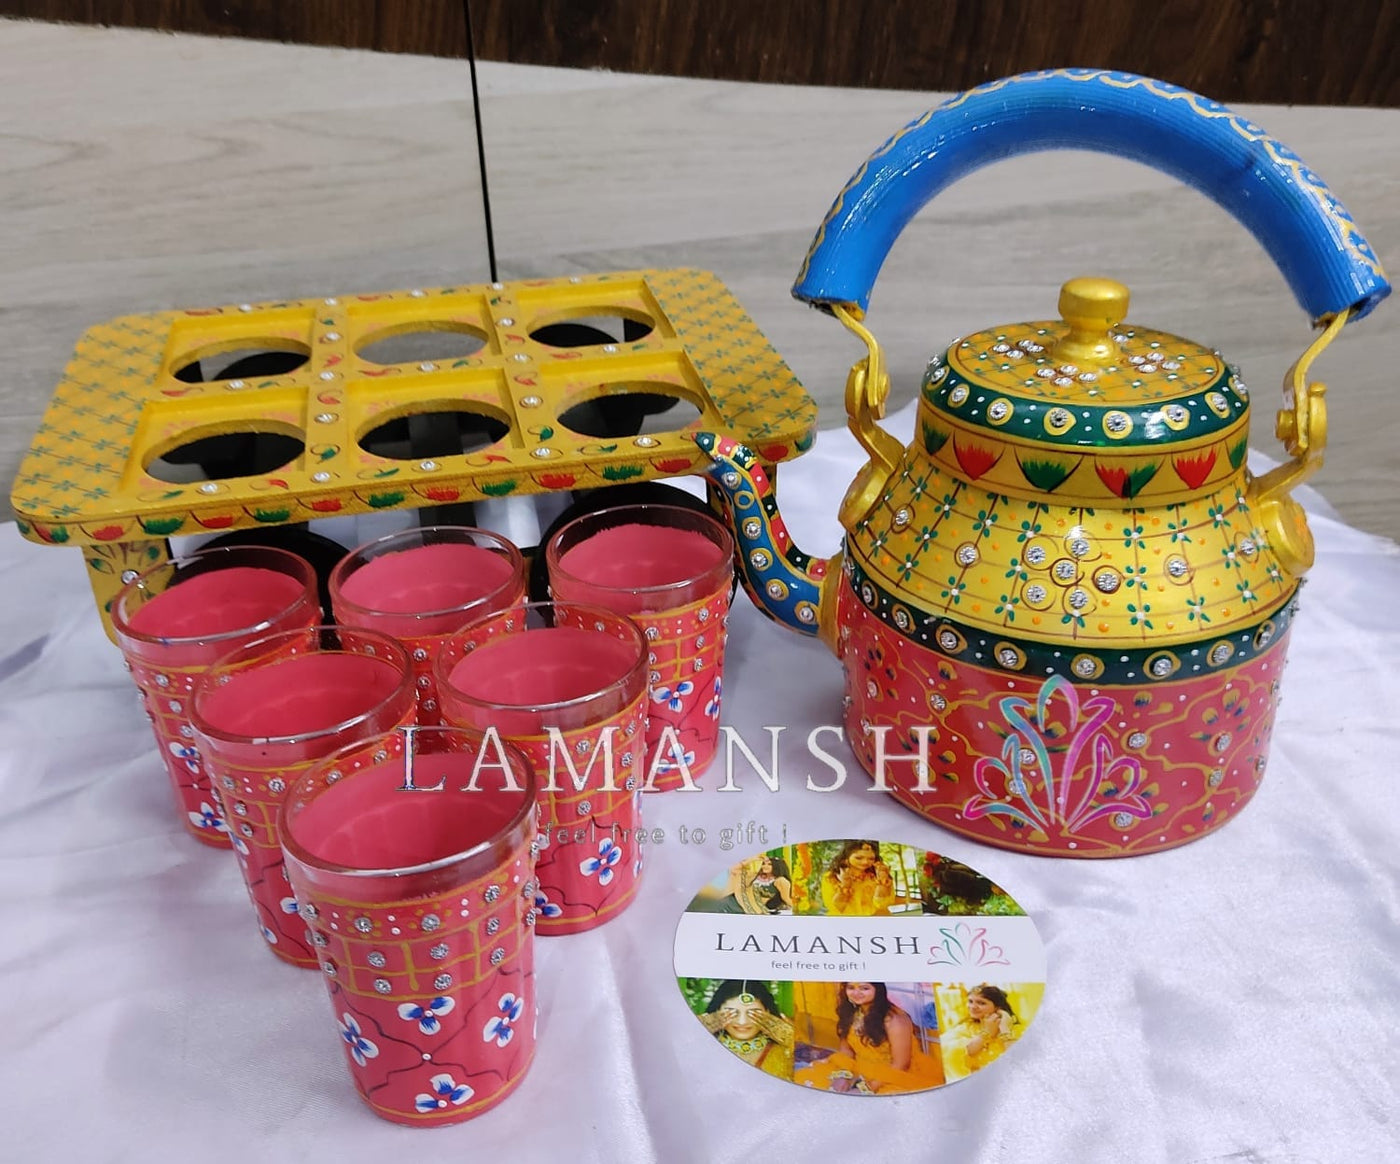 LAMANSH Assorted Colours / Aluminium LAMANSH® ( Set of 1 ) Hand Painted Tea Kettles with 6 Glass Sets and Wooden Cart for Gifting 🎁 & Decoration